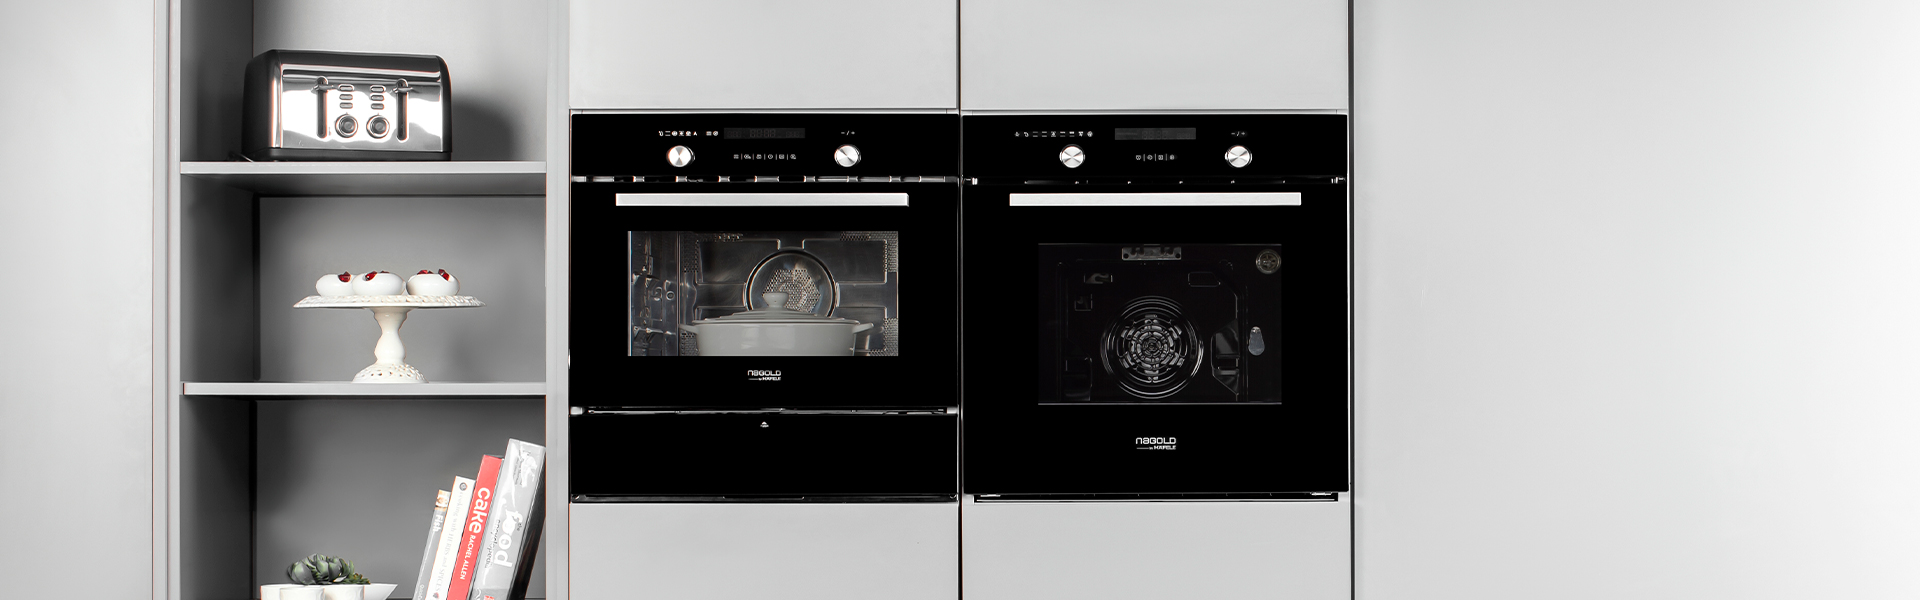 Banner image of furnisher kitchen installed with comi oven